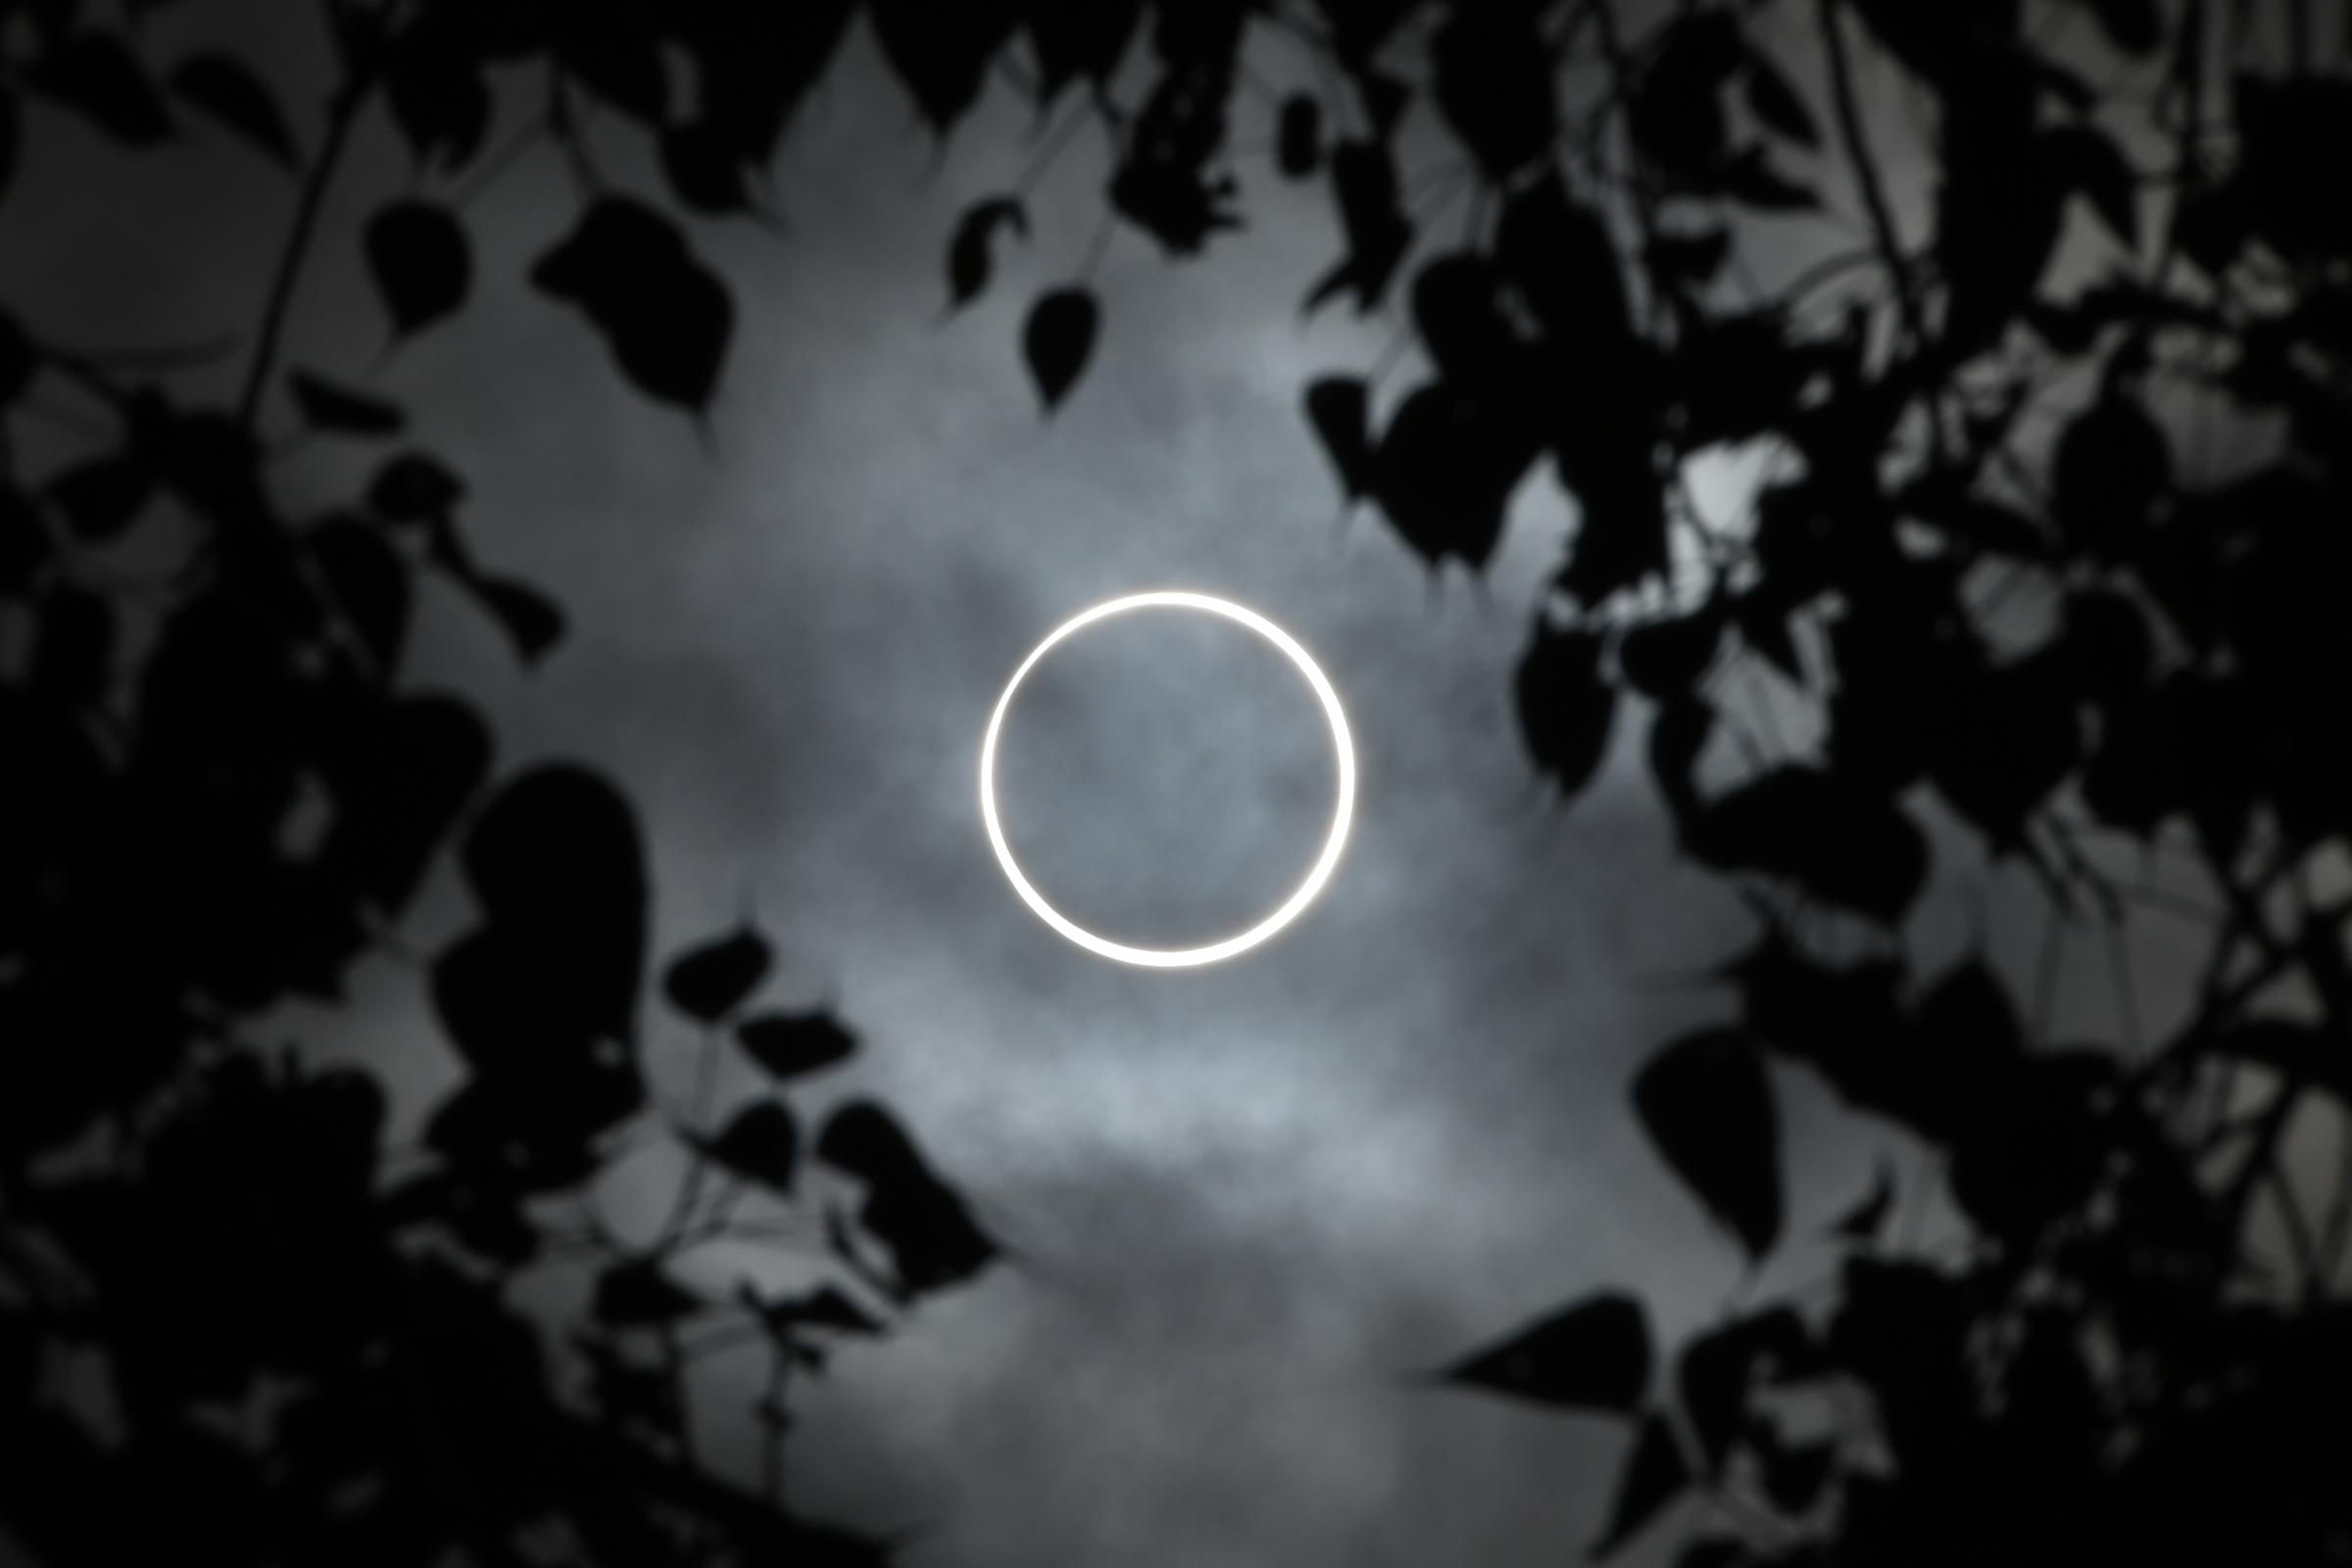 Solar eclipse: When does it start and where can I see it in Scotland?